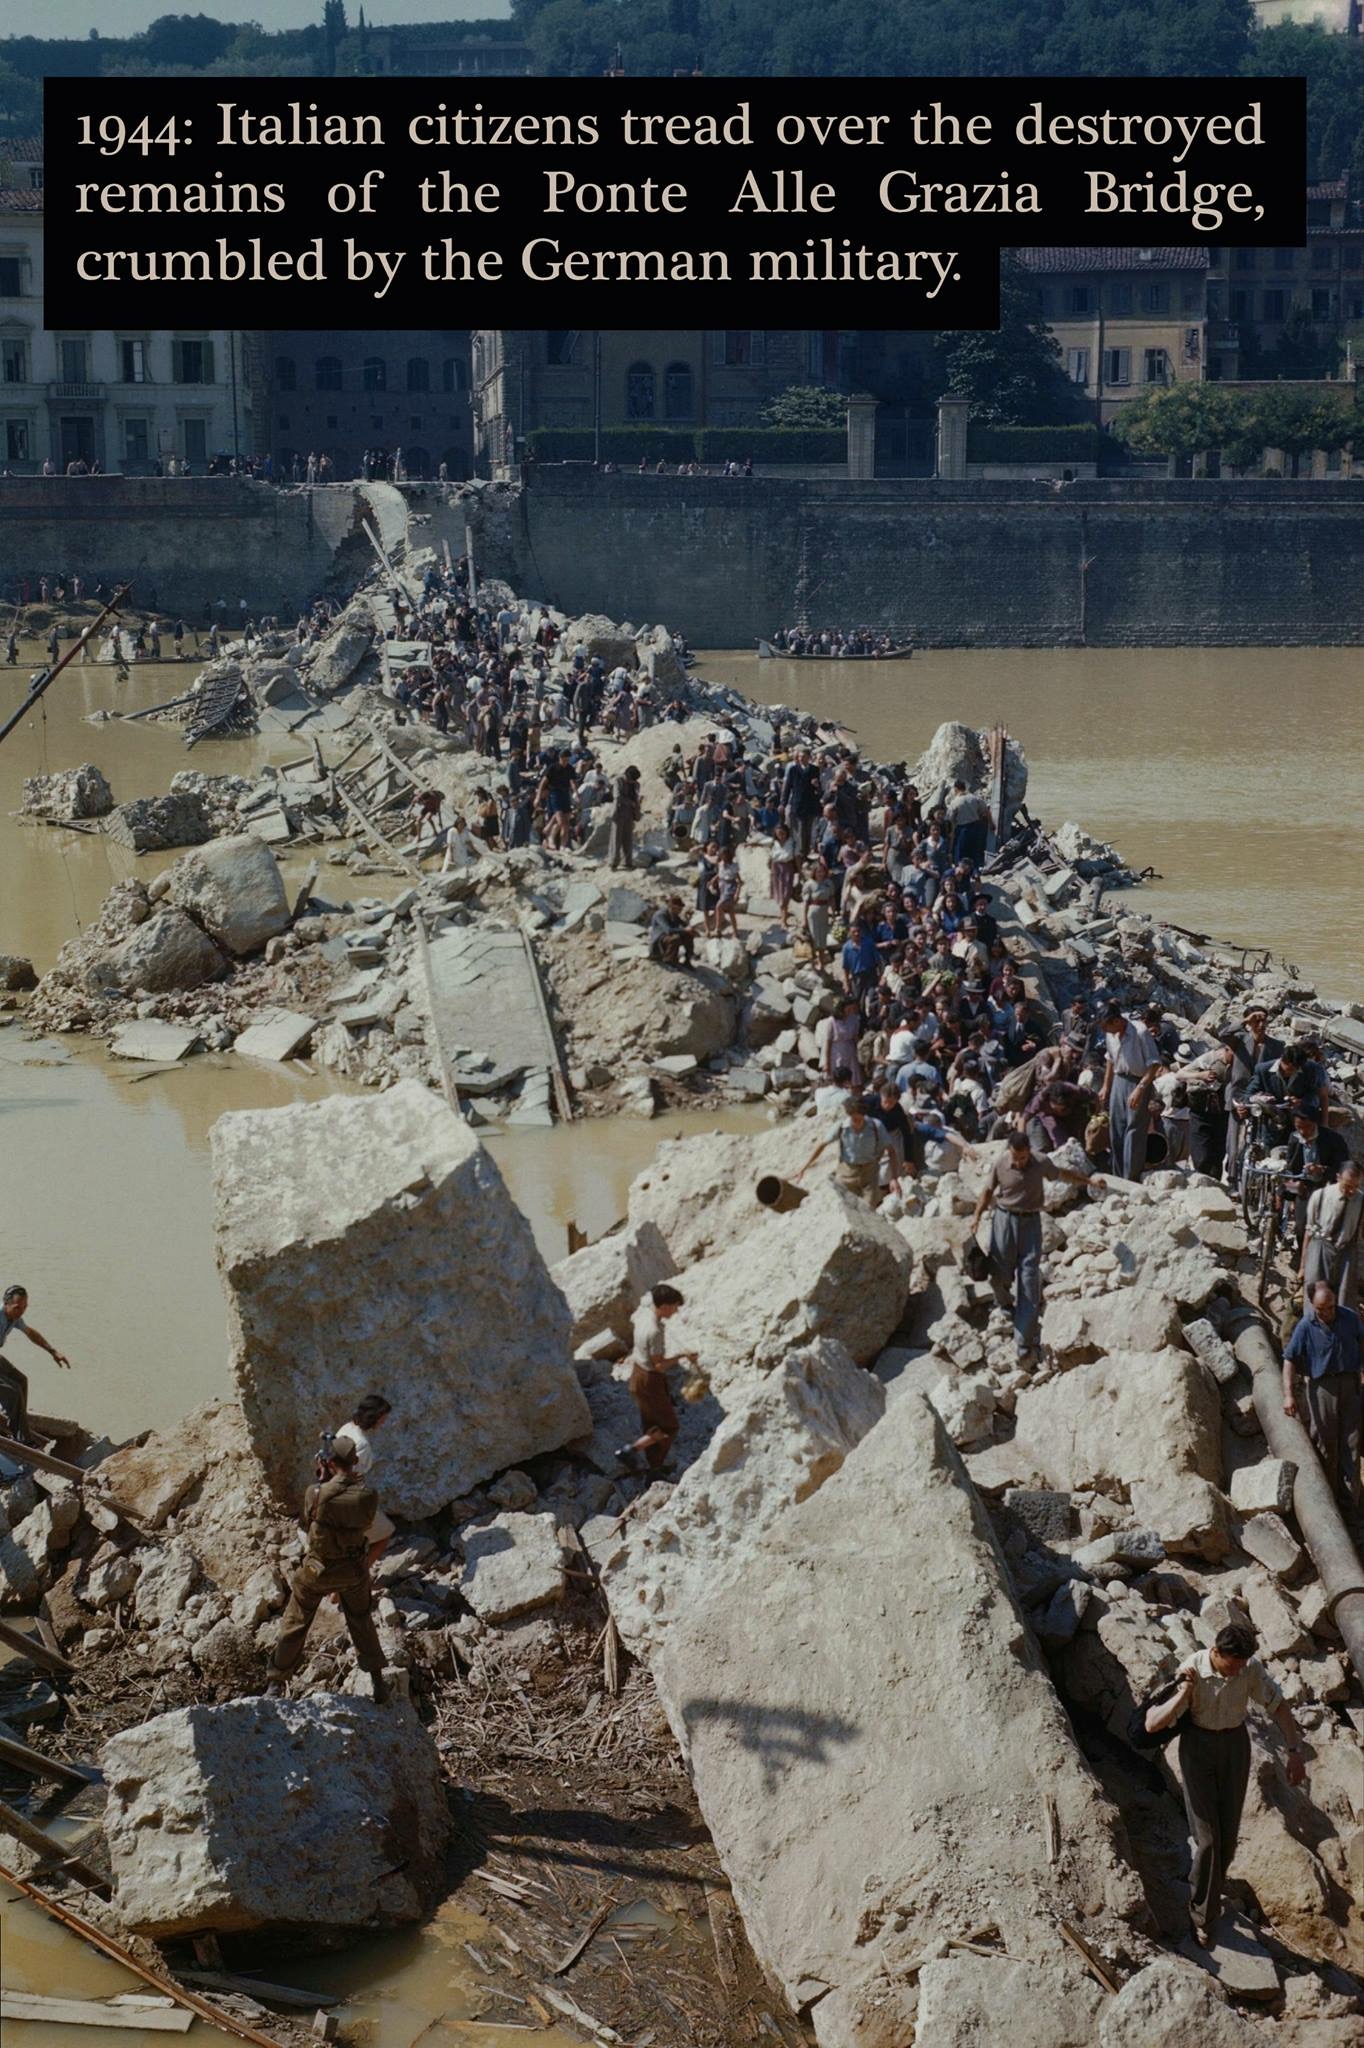 Ponte alle Grazie - 1944 Italian citizens tread over the destroyed remains of the Ponte Alle Grazia Bridge, crumbled by the German military.